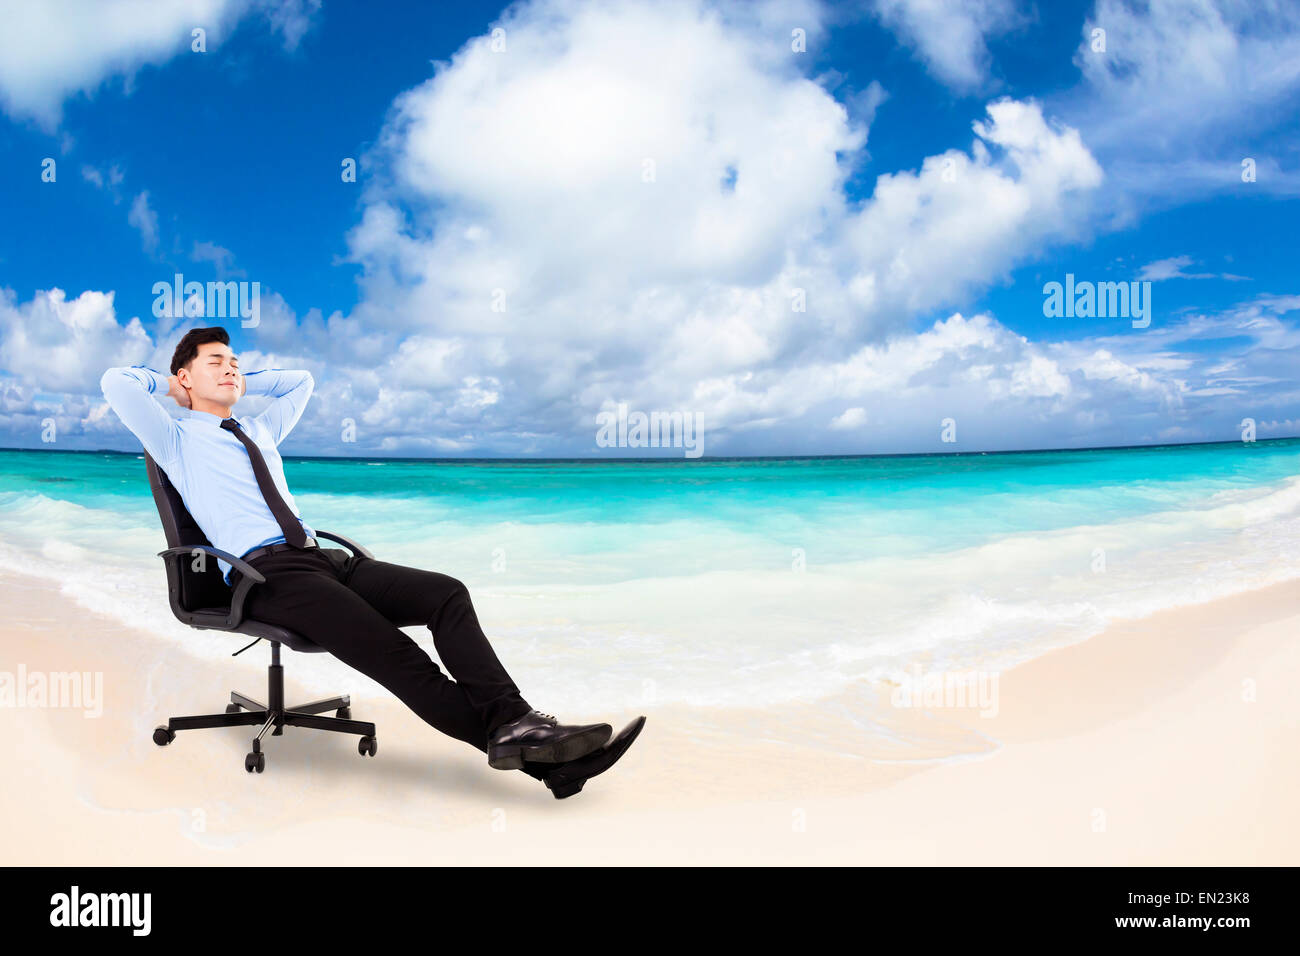 relaxed Young businessman sitting in a chair with beach background Stock Photo